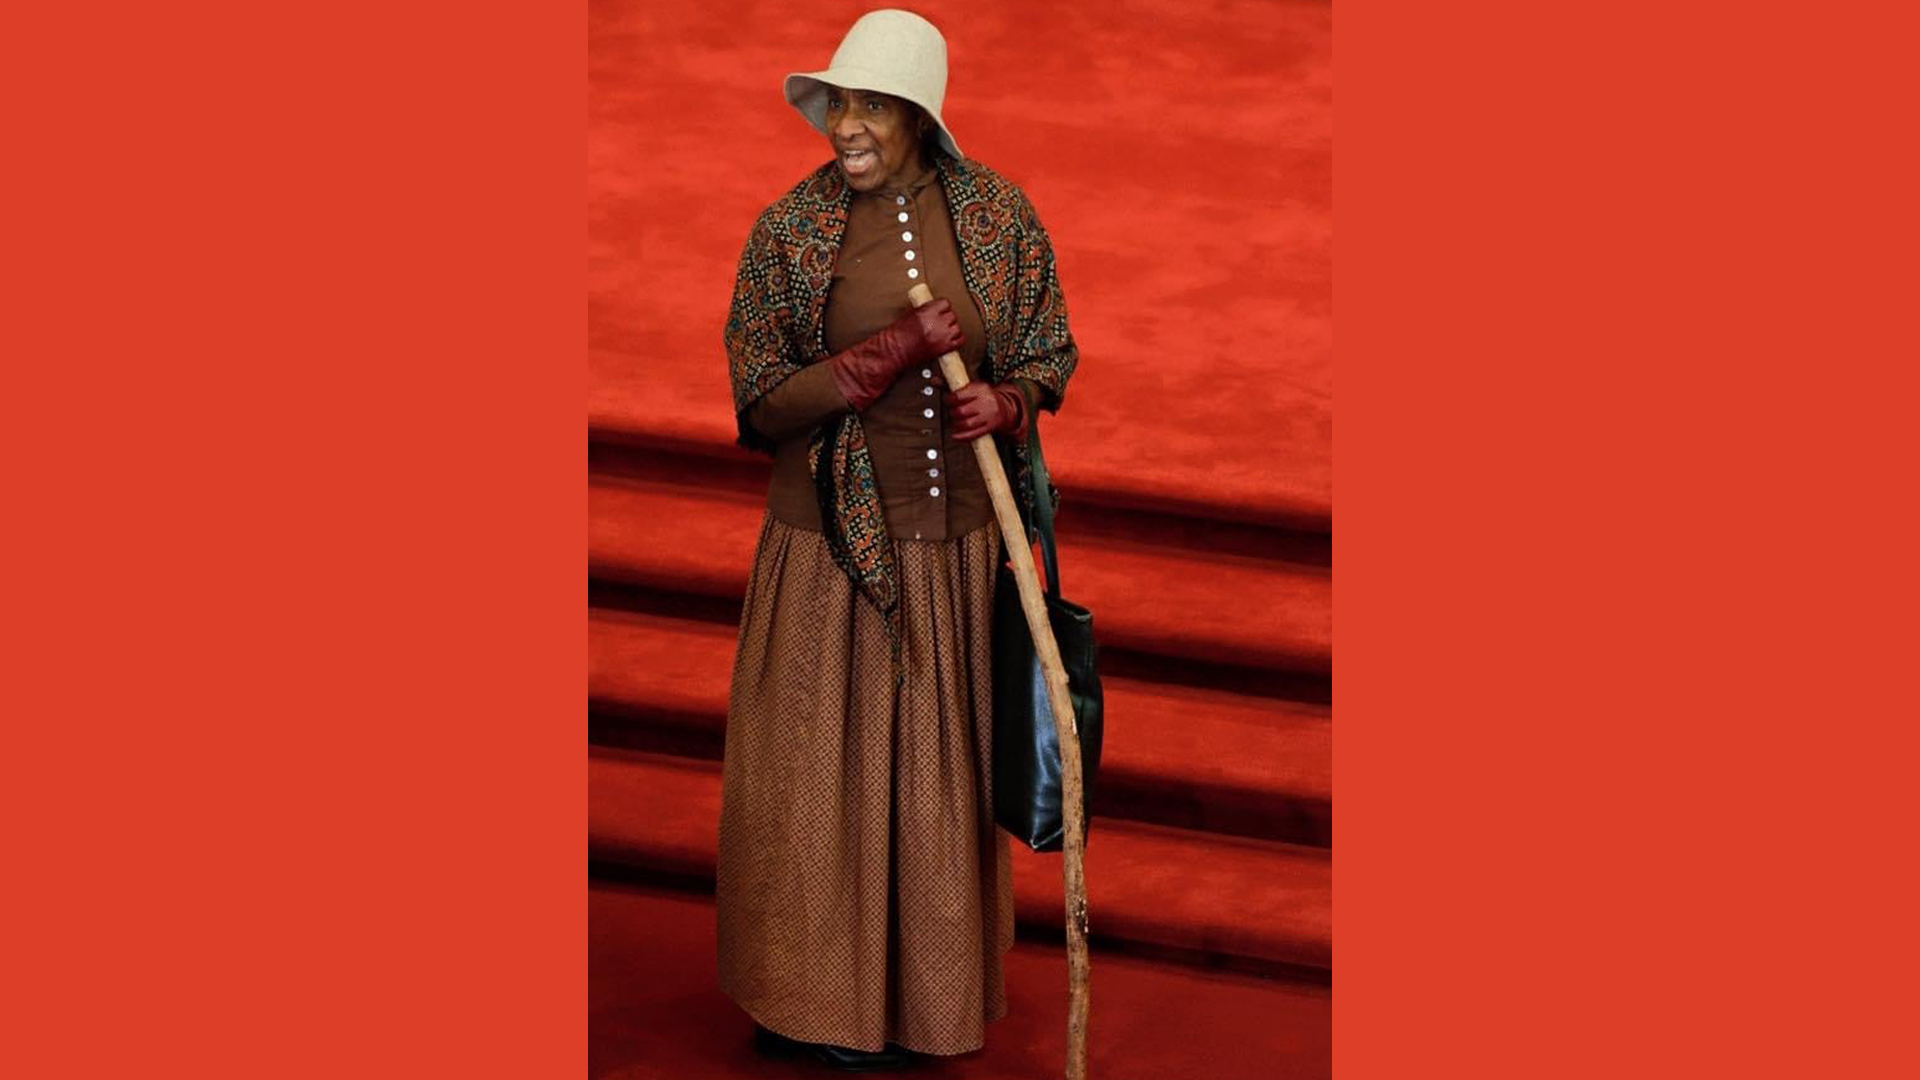 kathryn harris dressed as harriet tubman speaking and holding a walking stick